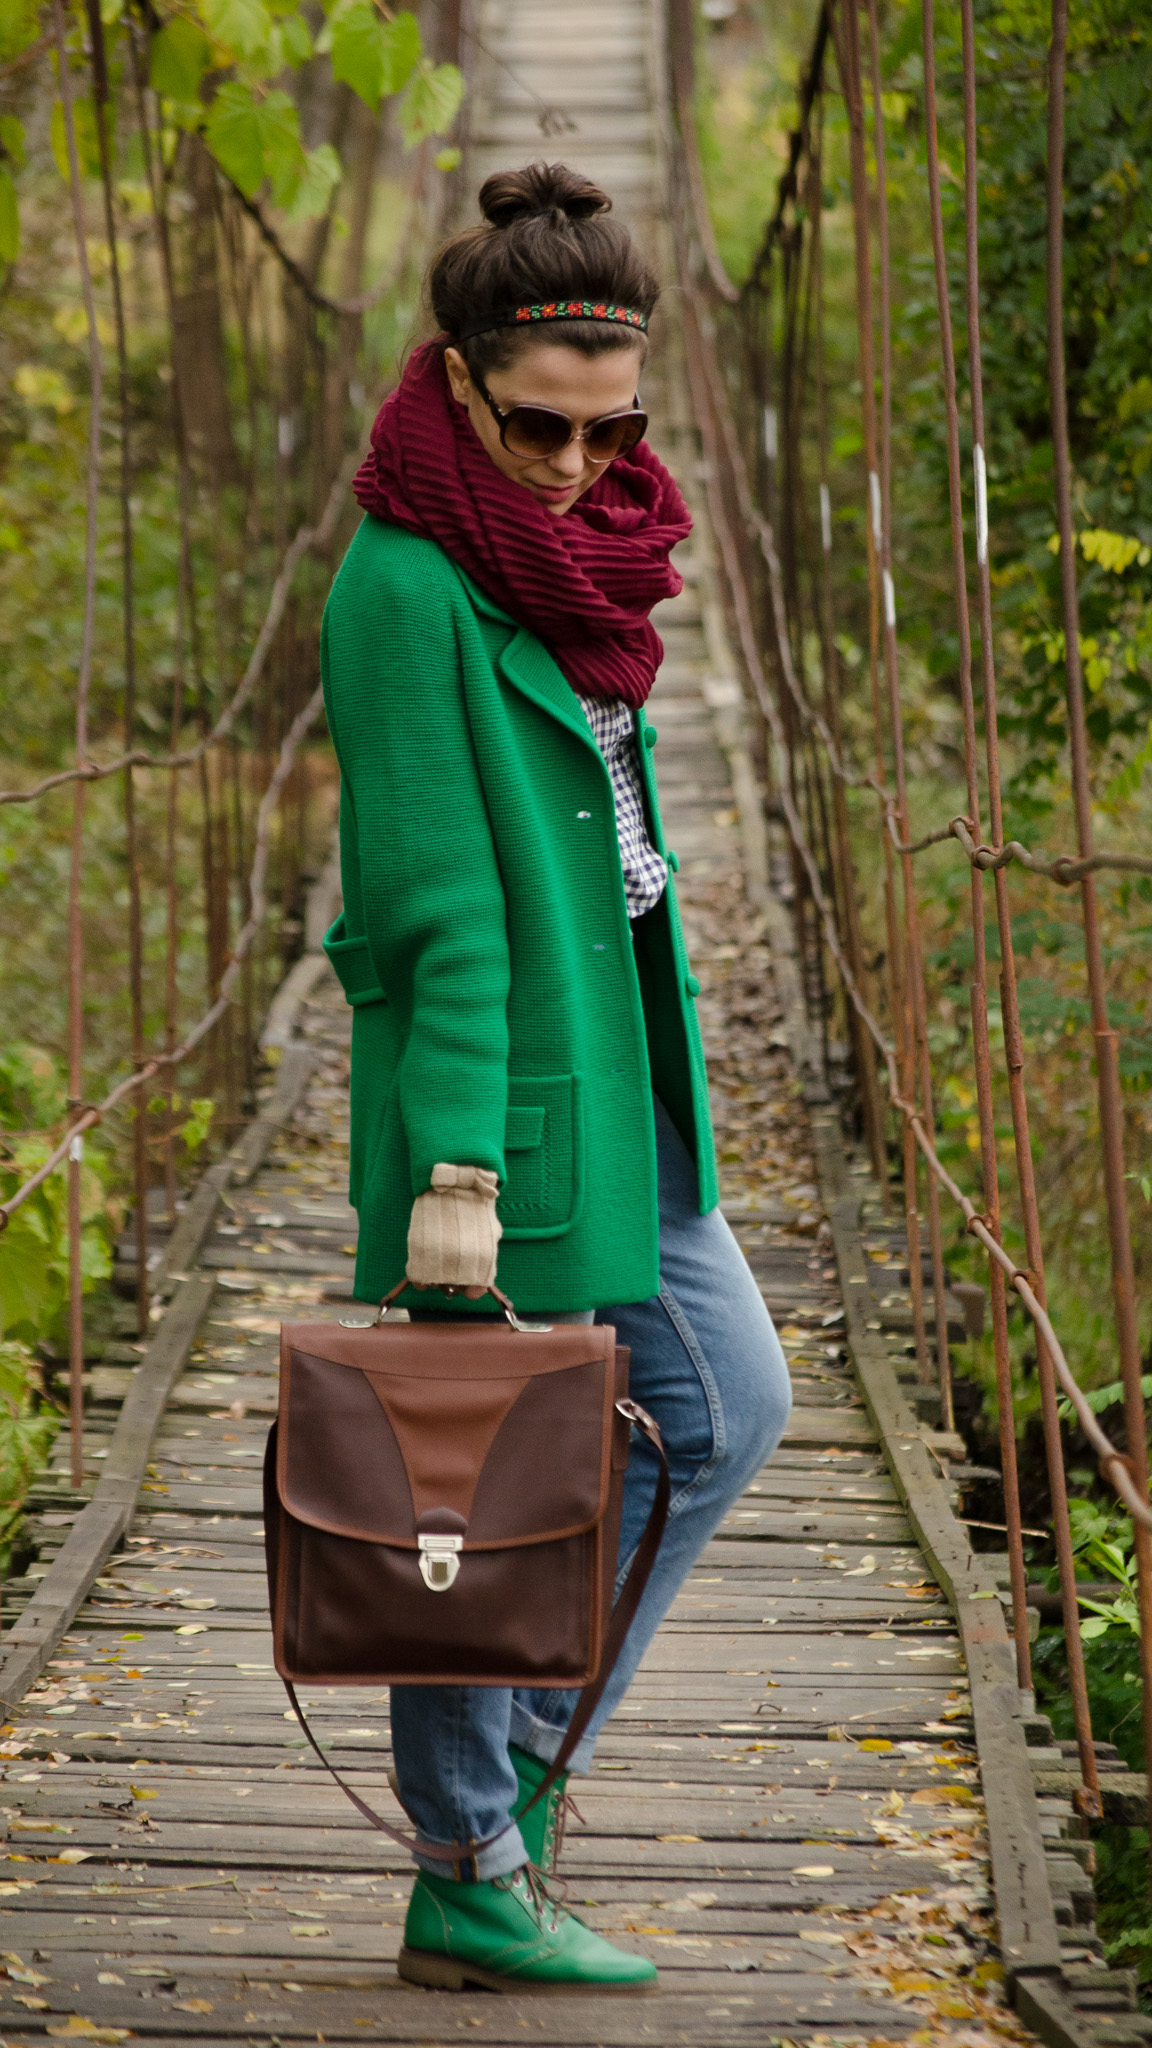 over-sized green sweater fall outfit mom jeans h&m green boots brown satchel bag thrifted blue shirt bow tie burgundy scarf school gloves